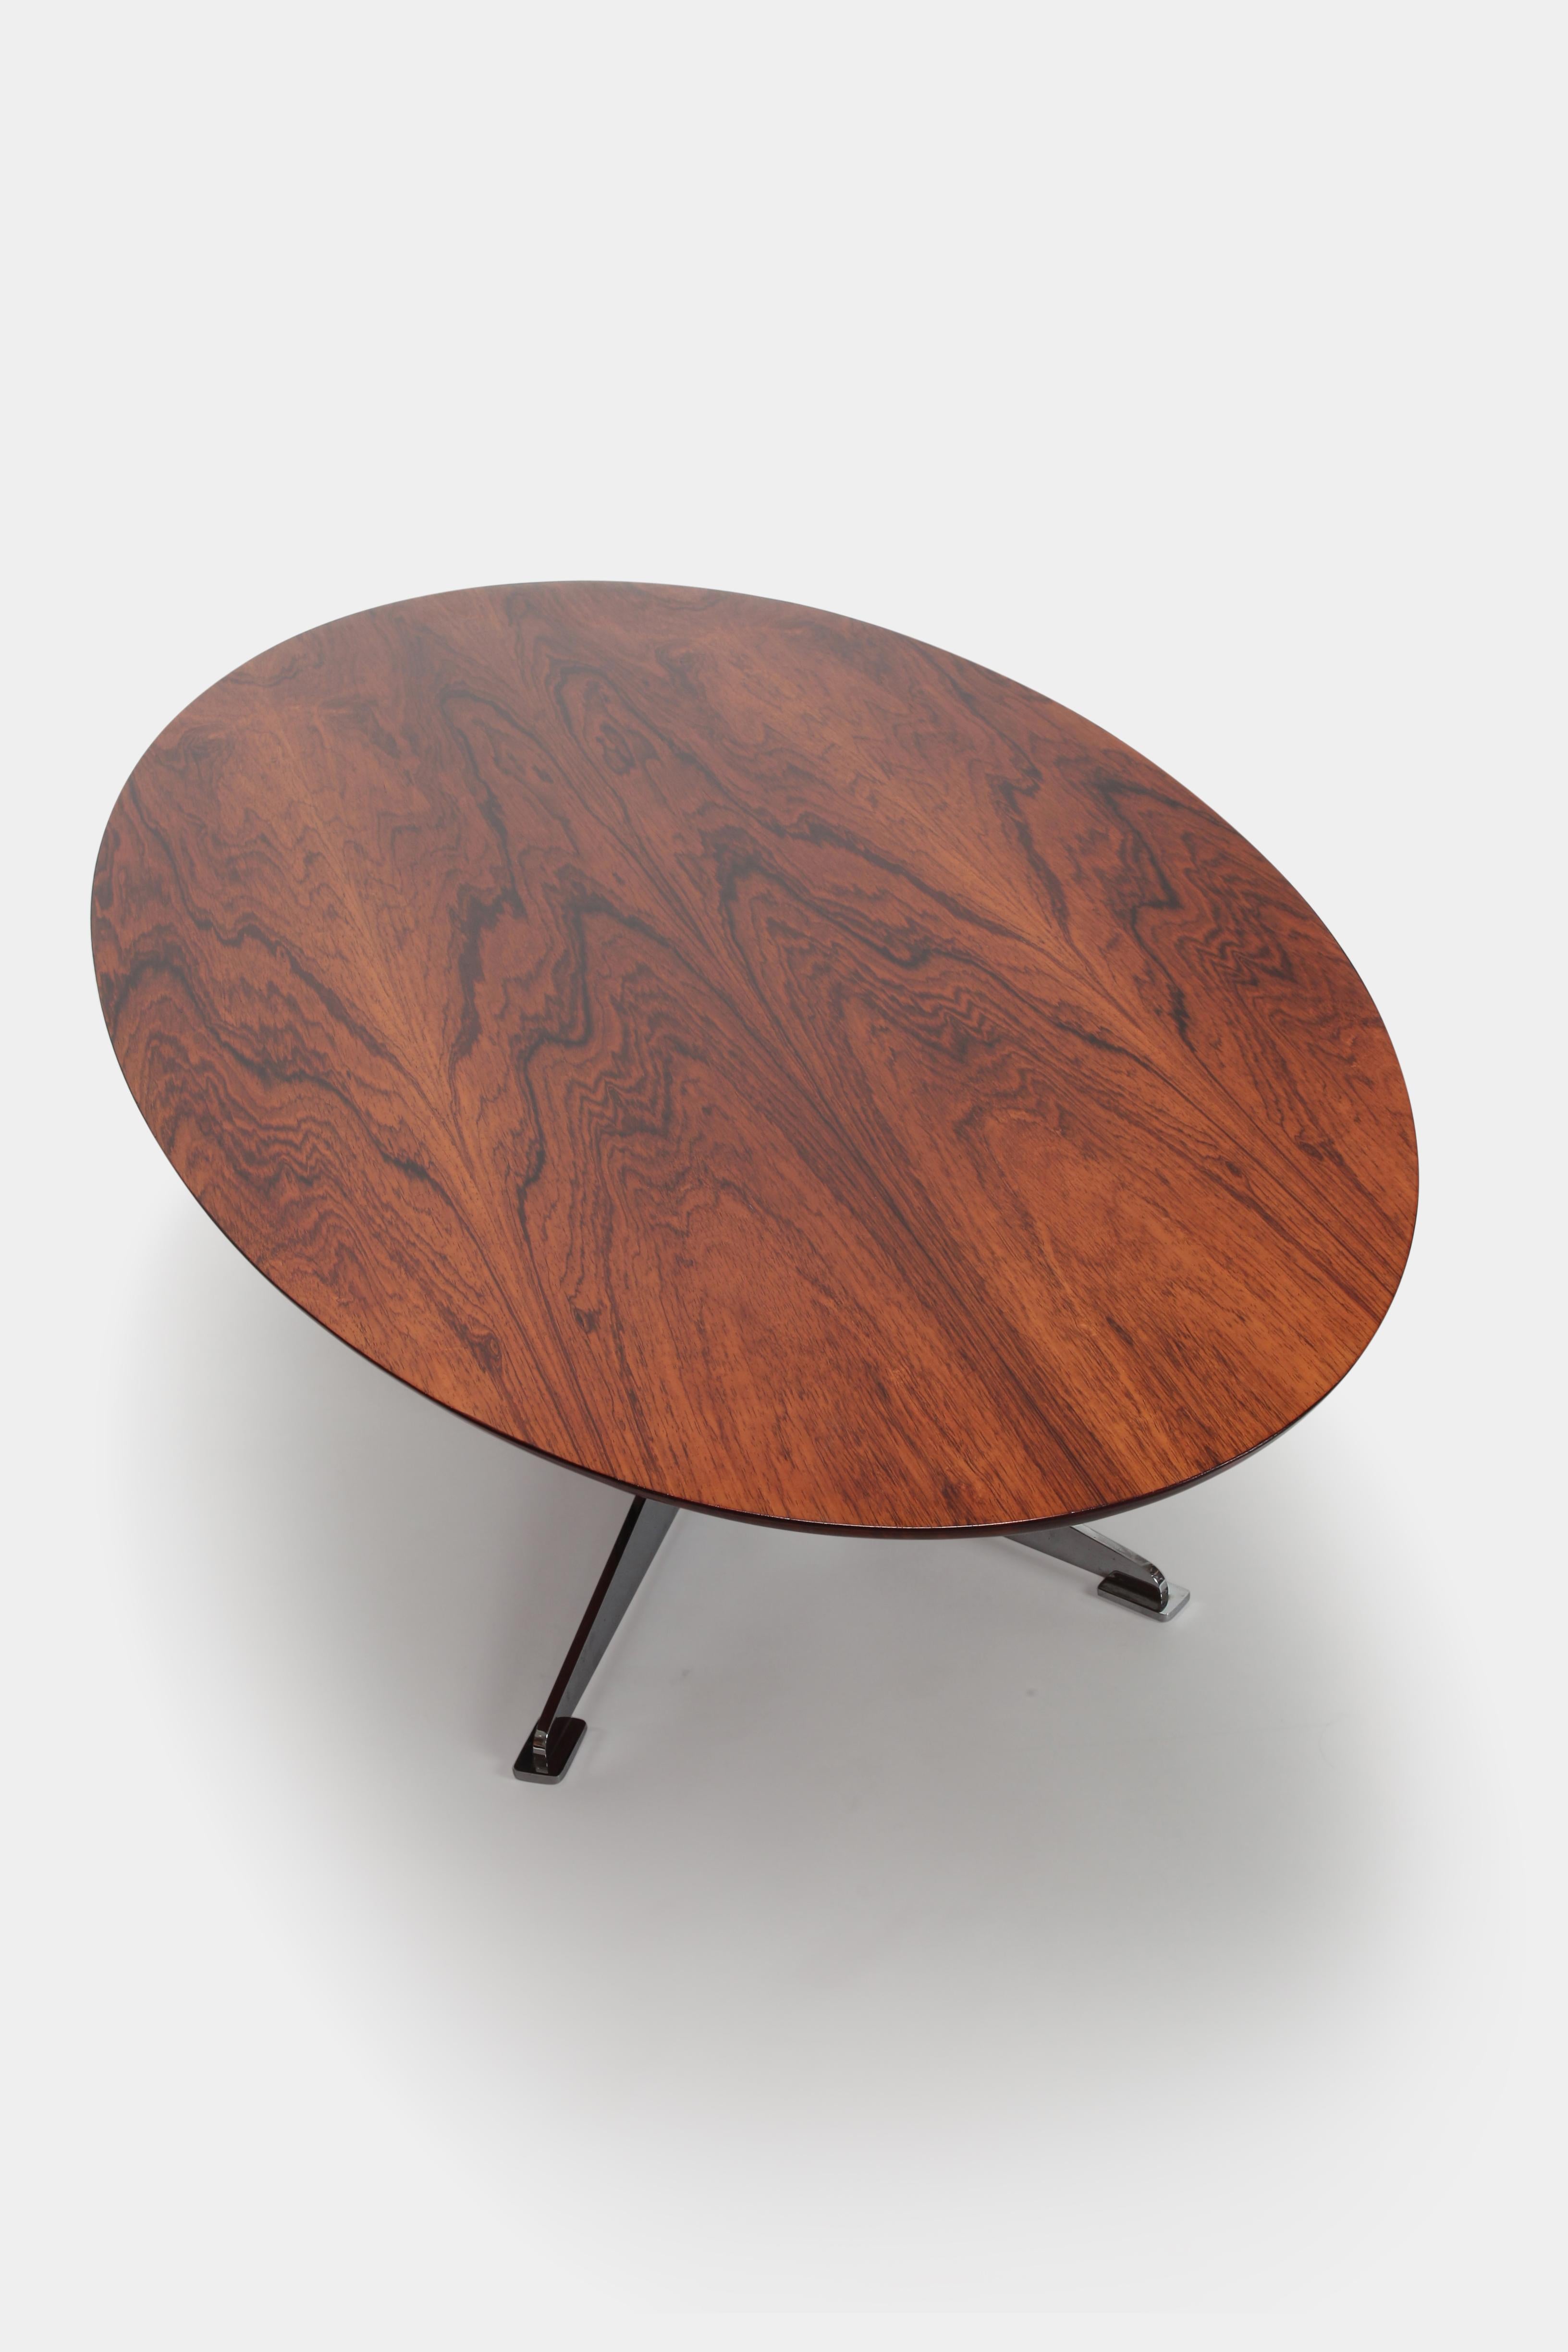 Danish coffee table manufactured in the 1970s. Stunning coffee table, customized. Oval tabletop made of beautiful grained Brazilian rosewood on a edgy chrome steel base. The table top was professionally new lacquered.
 